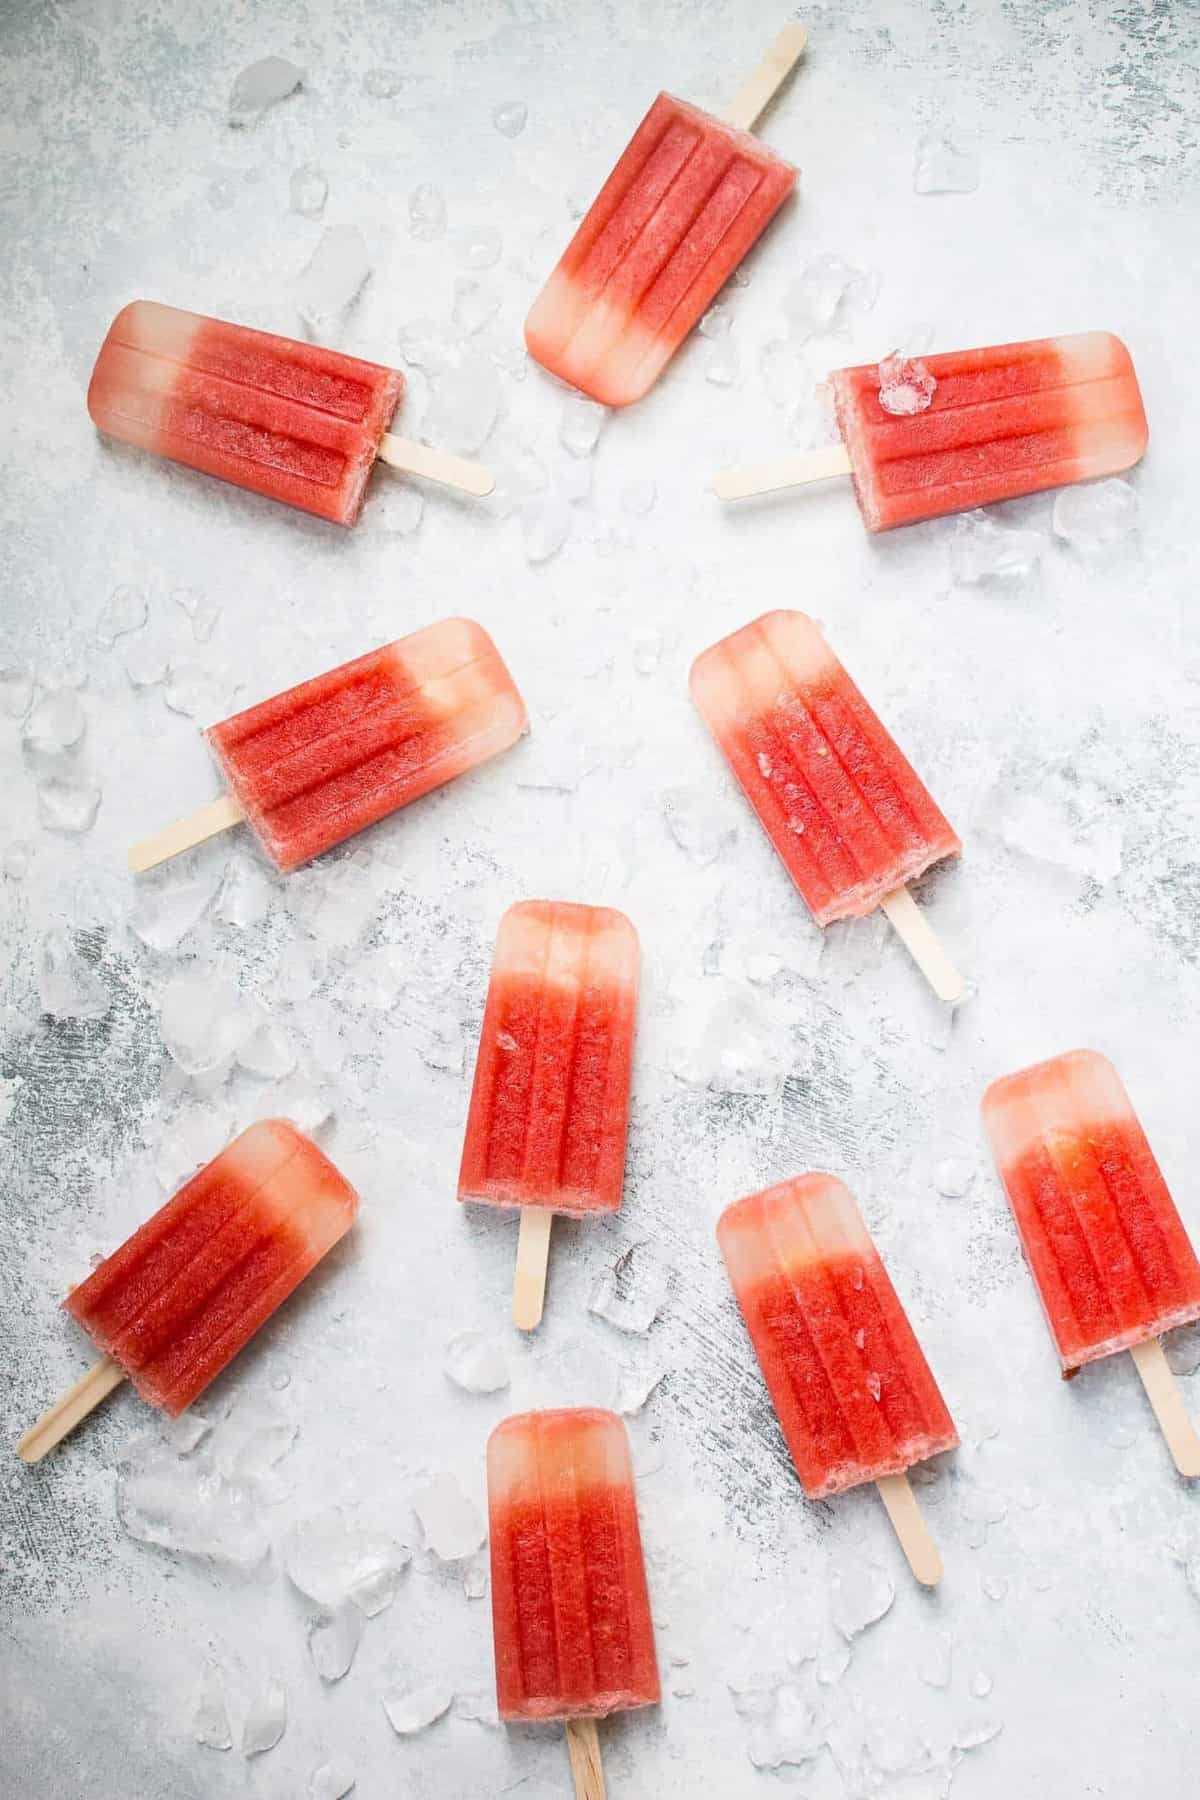 Watermelon Margarita Popsicles by Salt and Lavender and other amazing boozy popsicle recipes!